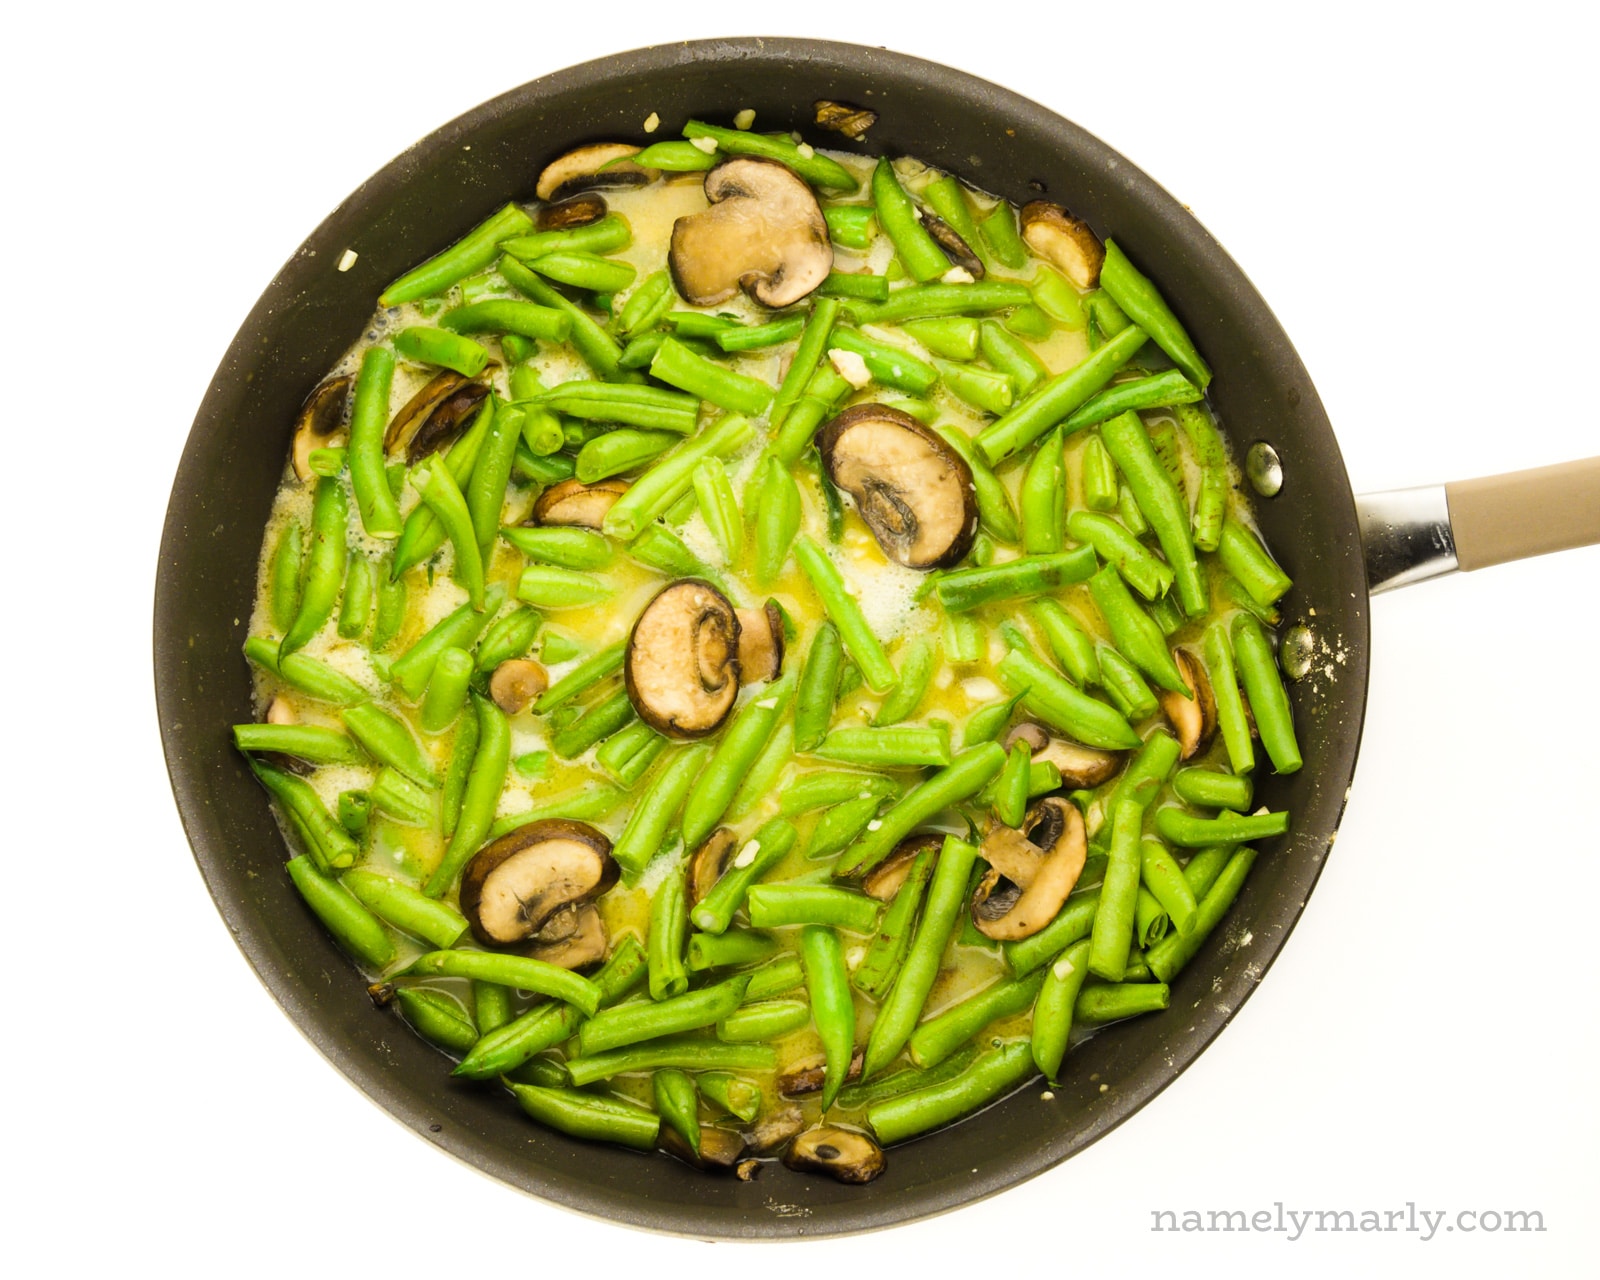 A skillet is full of green beans and mushrooms cooking.